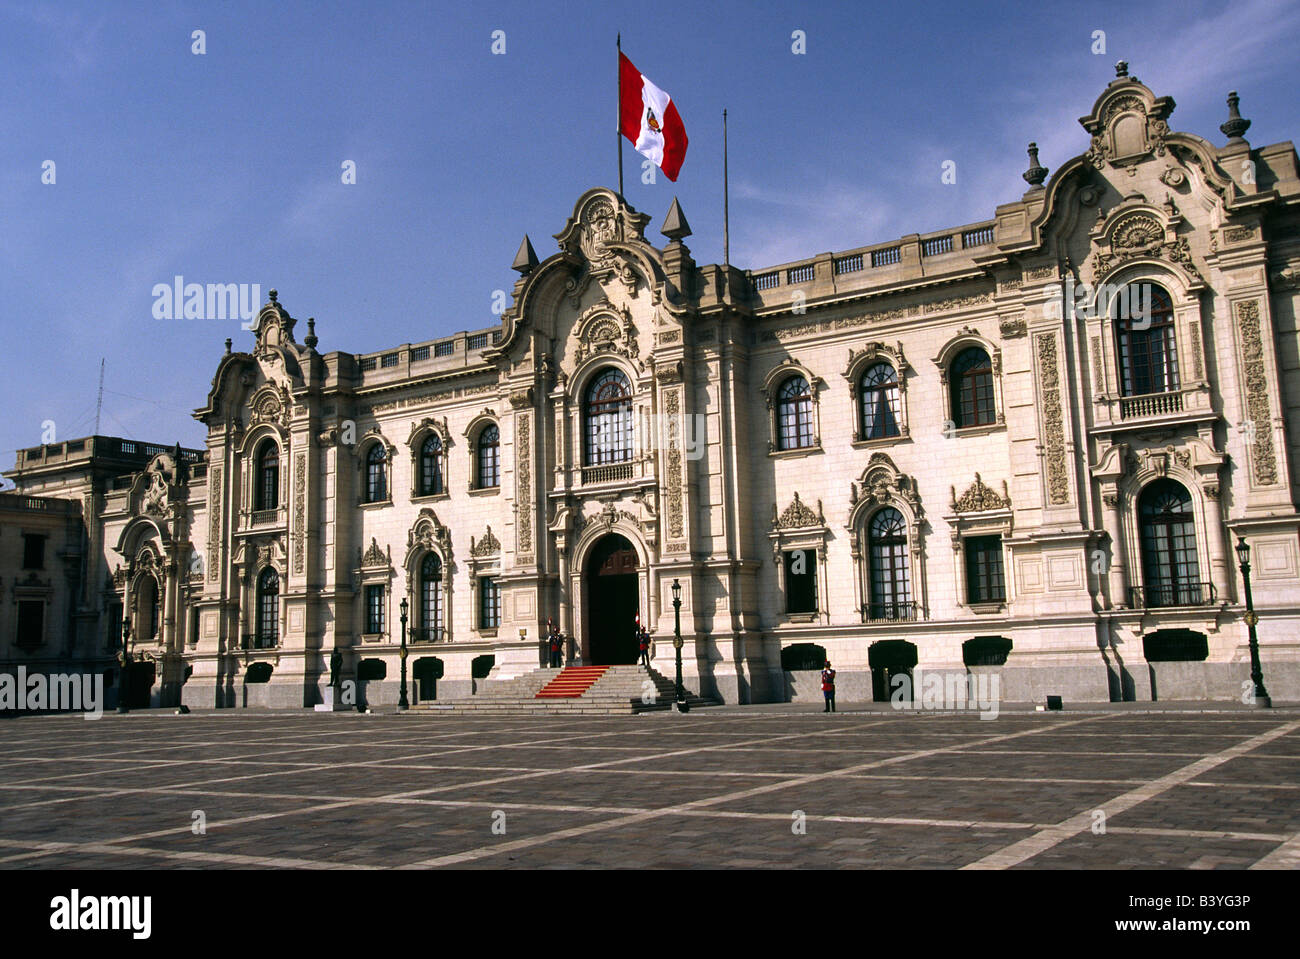 Peru, Lima, Palacio de gobierno. Residence of Peru's President on the Plaza de Armas, central Lima, the Government Palace was built in 1937. Stock Photo